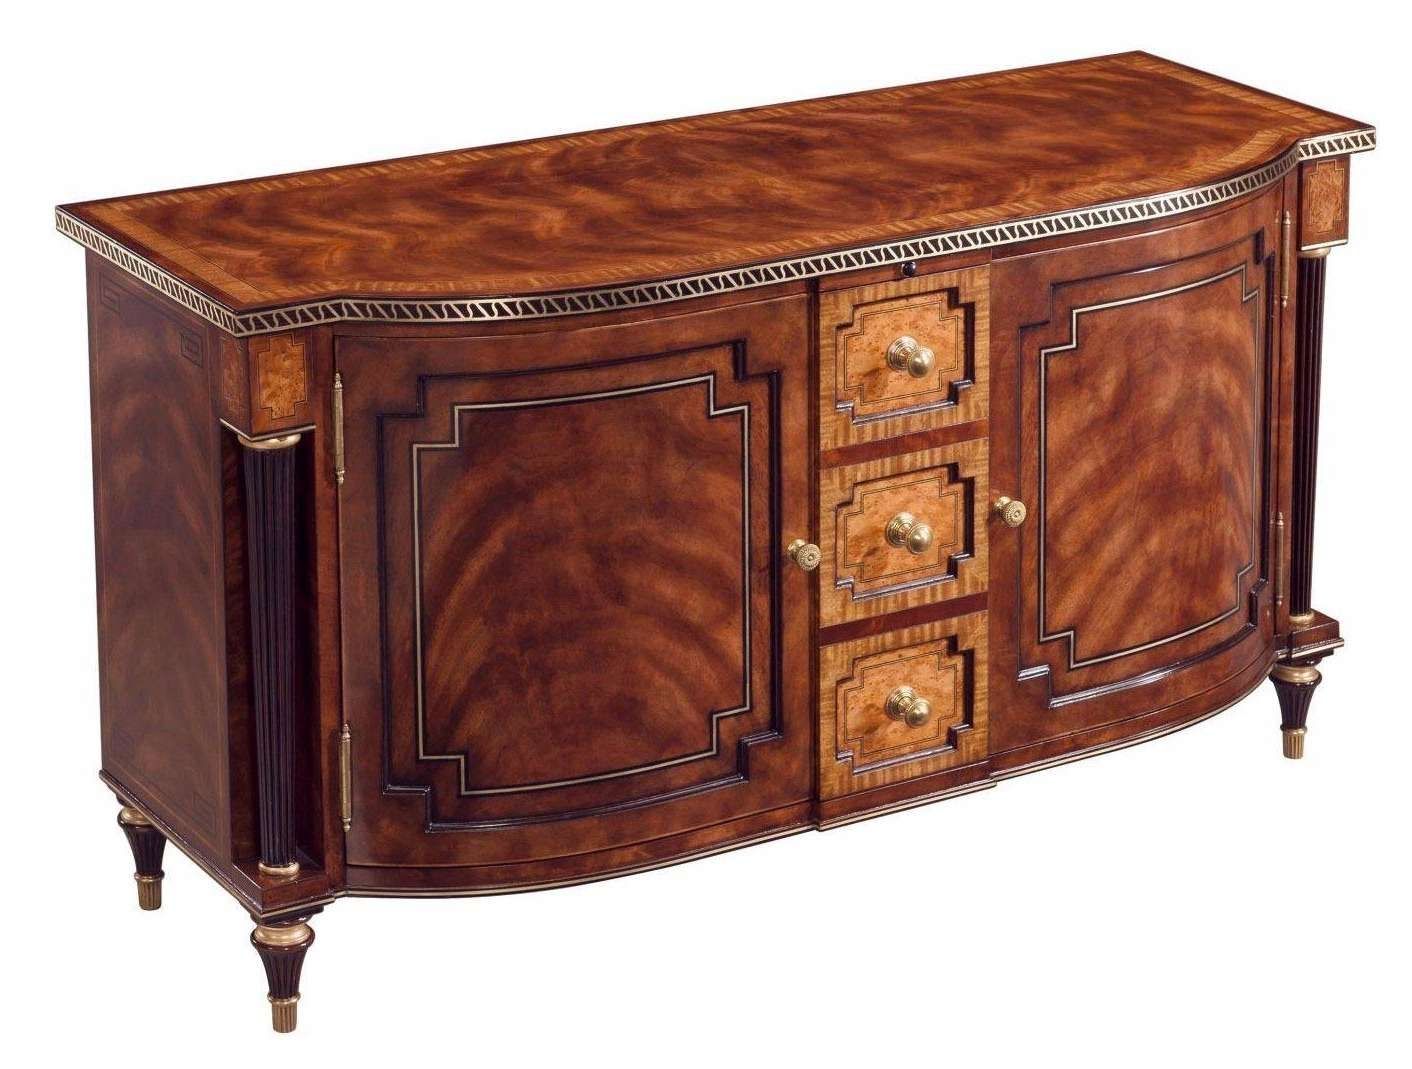 A Mahogany Veneered And Yew Burl Banded Tv Cabinet, Tv Stands From Inside Mahogany Tv Cabinets (View 17 of 20)